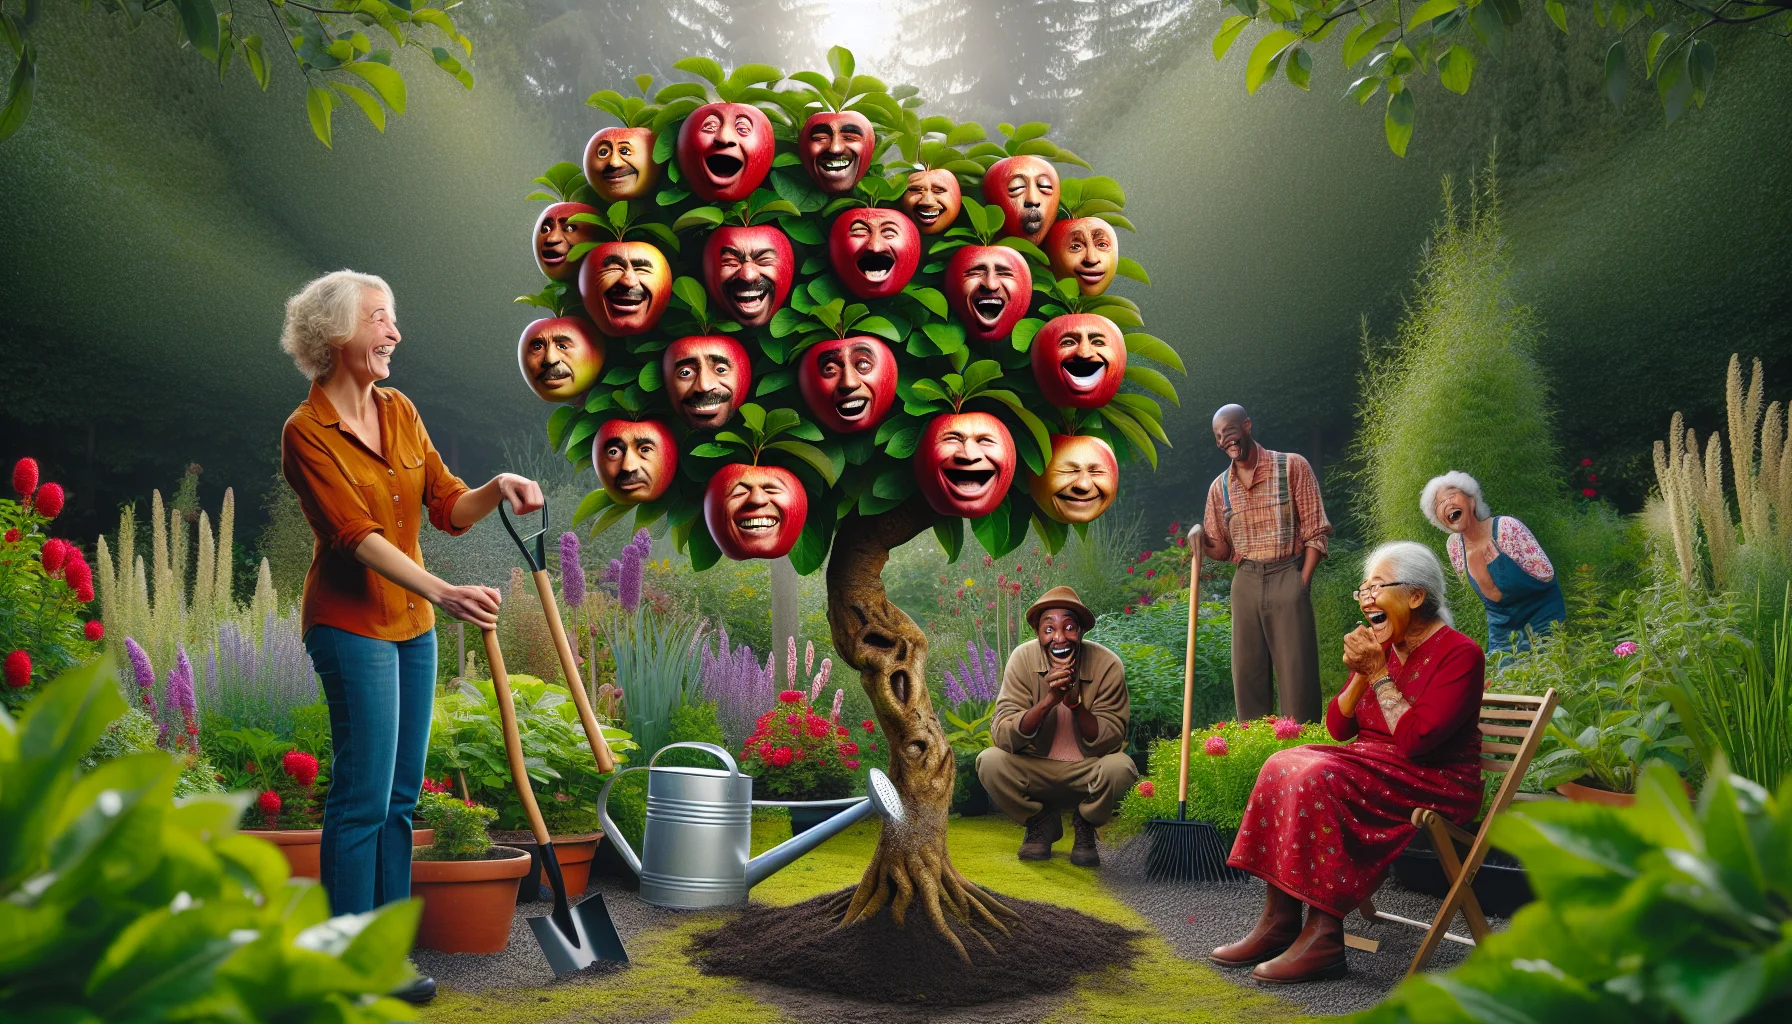 Create a lively and humorous scene in a lush garden full of diverse plants, with a Pyrus Malus tree taking the center stage. The tree is laden with rich, red apples that seem to have faces on them, each expressing a different comical emotion, making the tree appear as though it is playfully inviting the onlookers. In the background, there's a variety of people; A Caucasian woman laughing while watering the plants, a young Black boy amusedly pointing at the apple faces, a Middle-Eastern man chuckling wholeheartedly, and a South Asian elderly woman giggling with a rake in her hand. This joyous ensemble should evoke the rewarding and entertaining aspects of gardening.